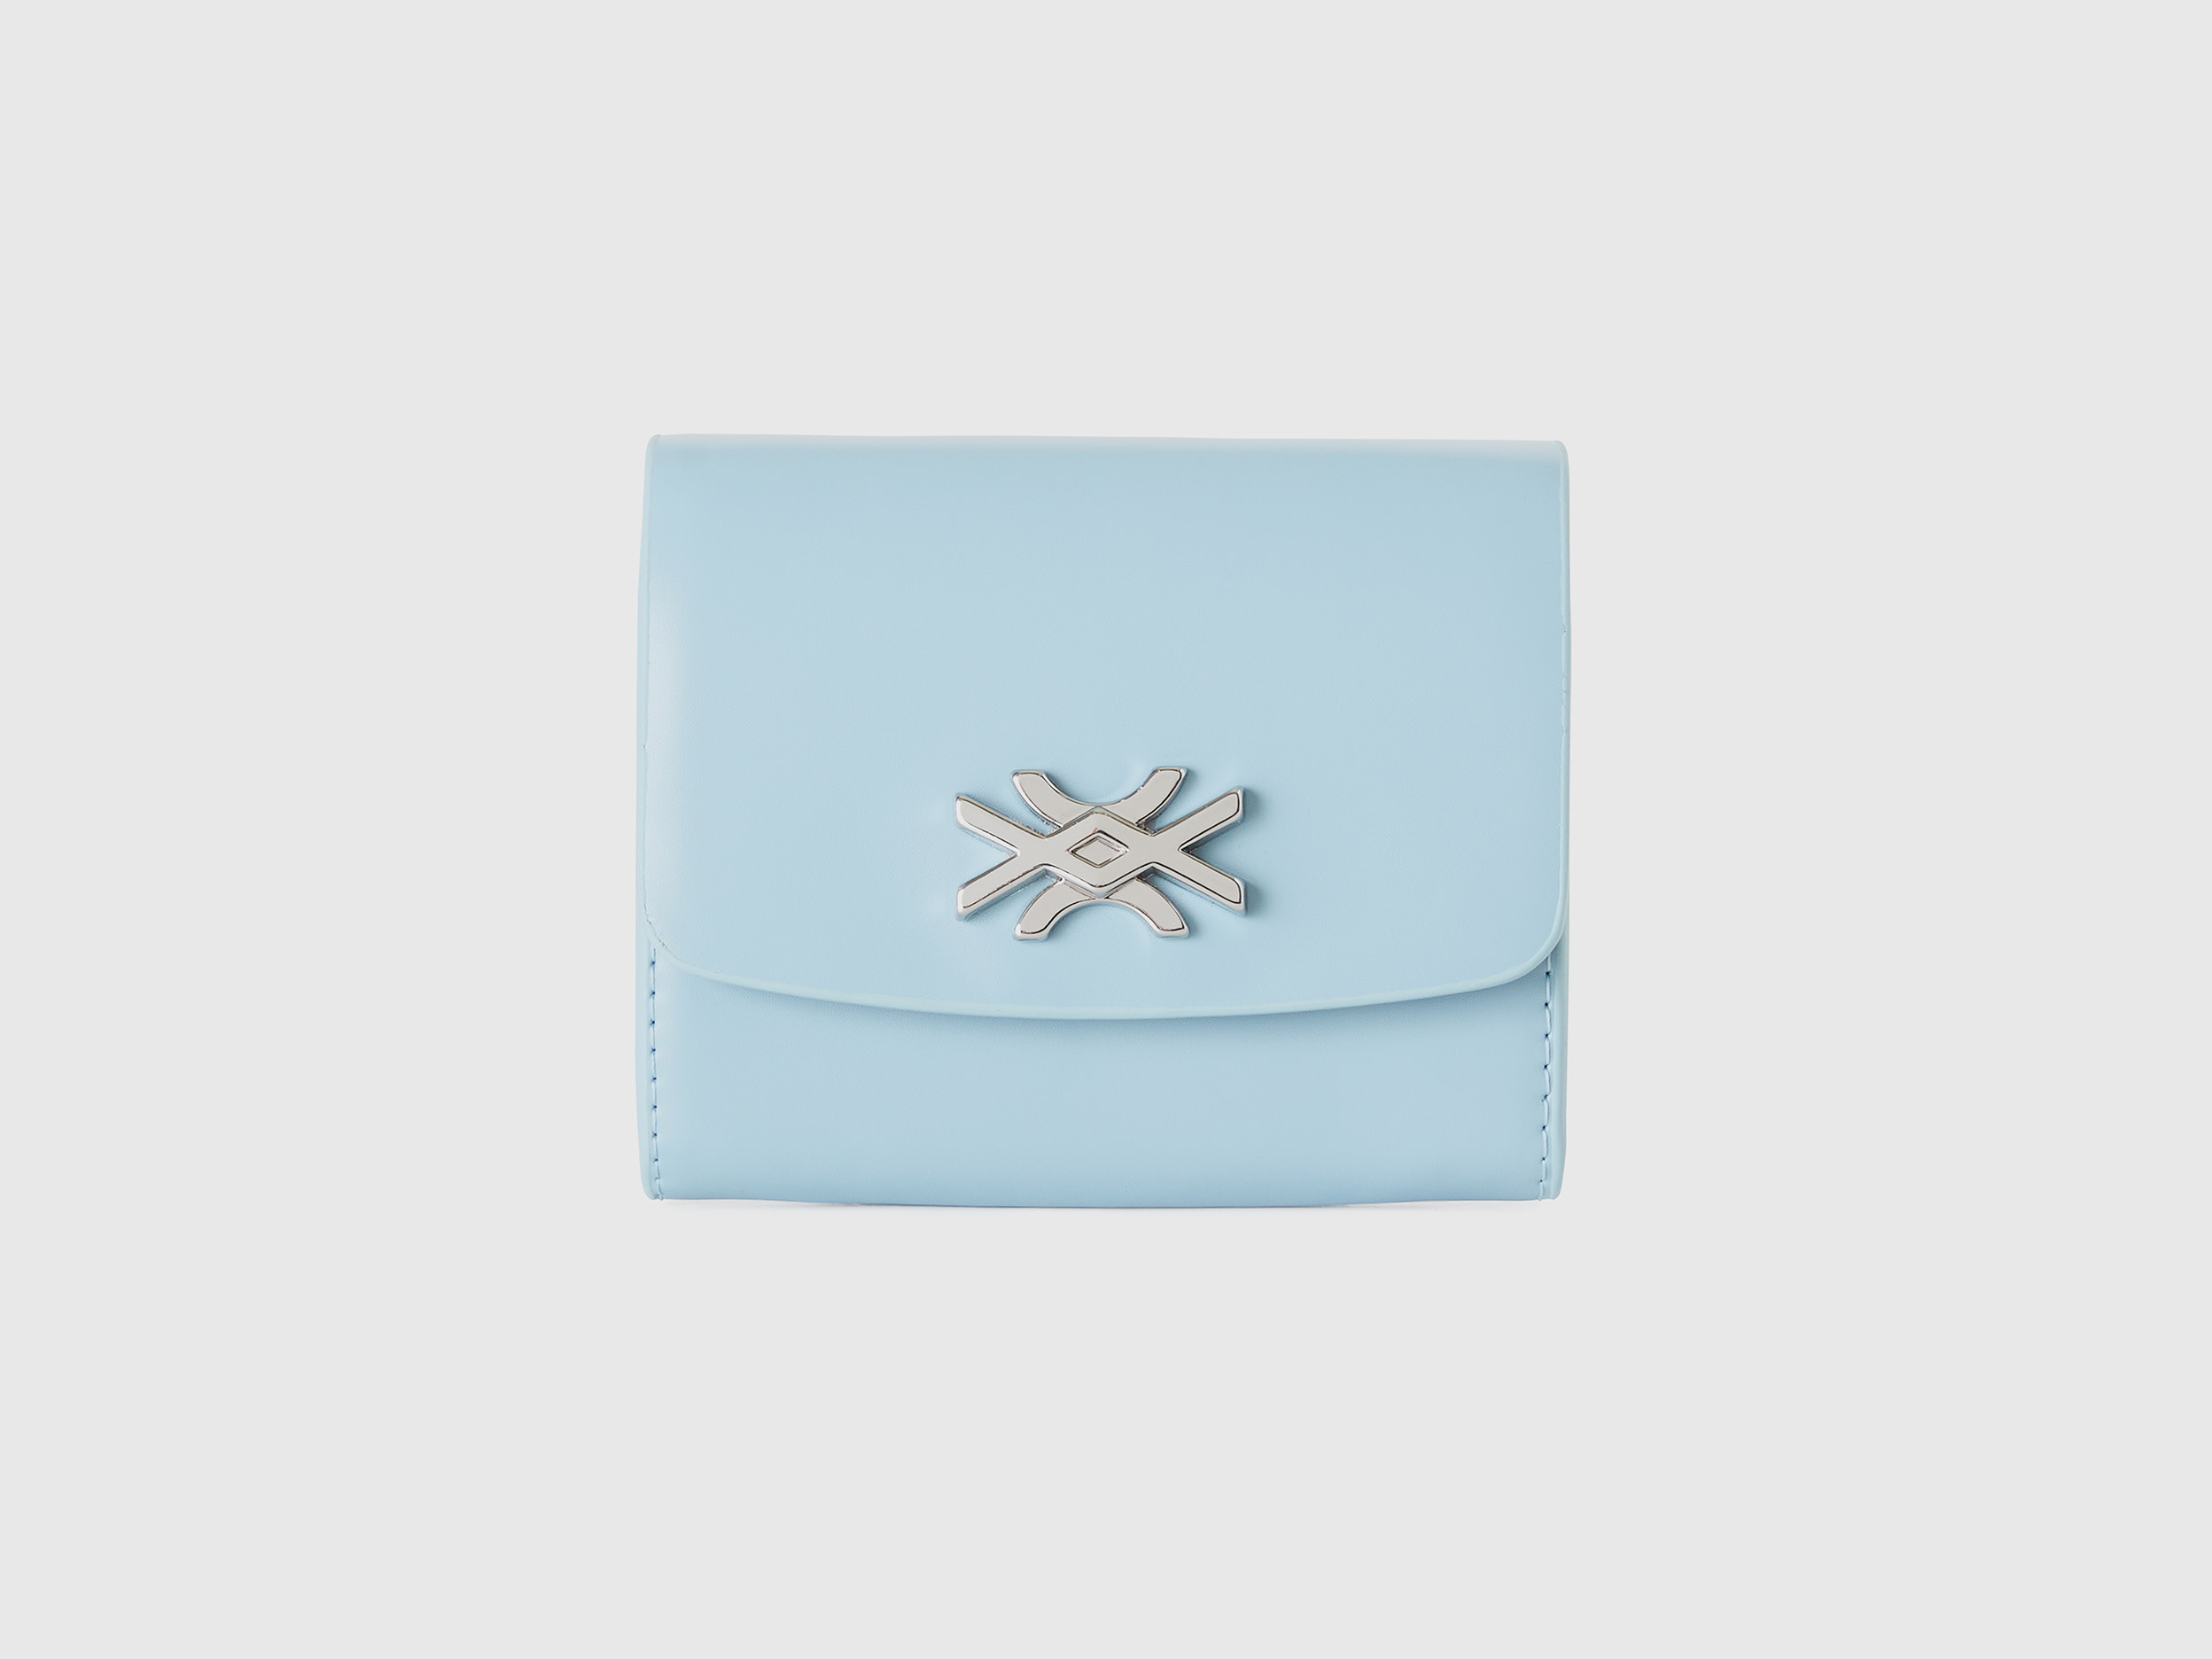 Benetton, Small Wallet In Imitation Leather, size OS, Sky Blue, Women